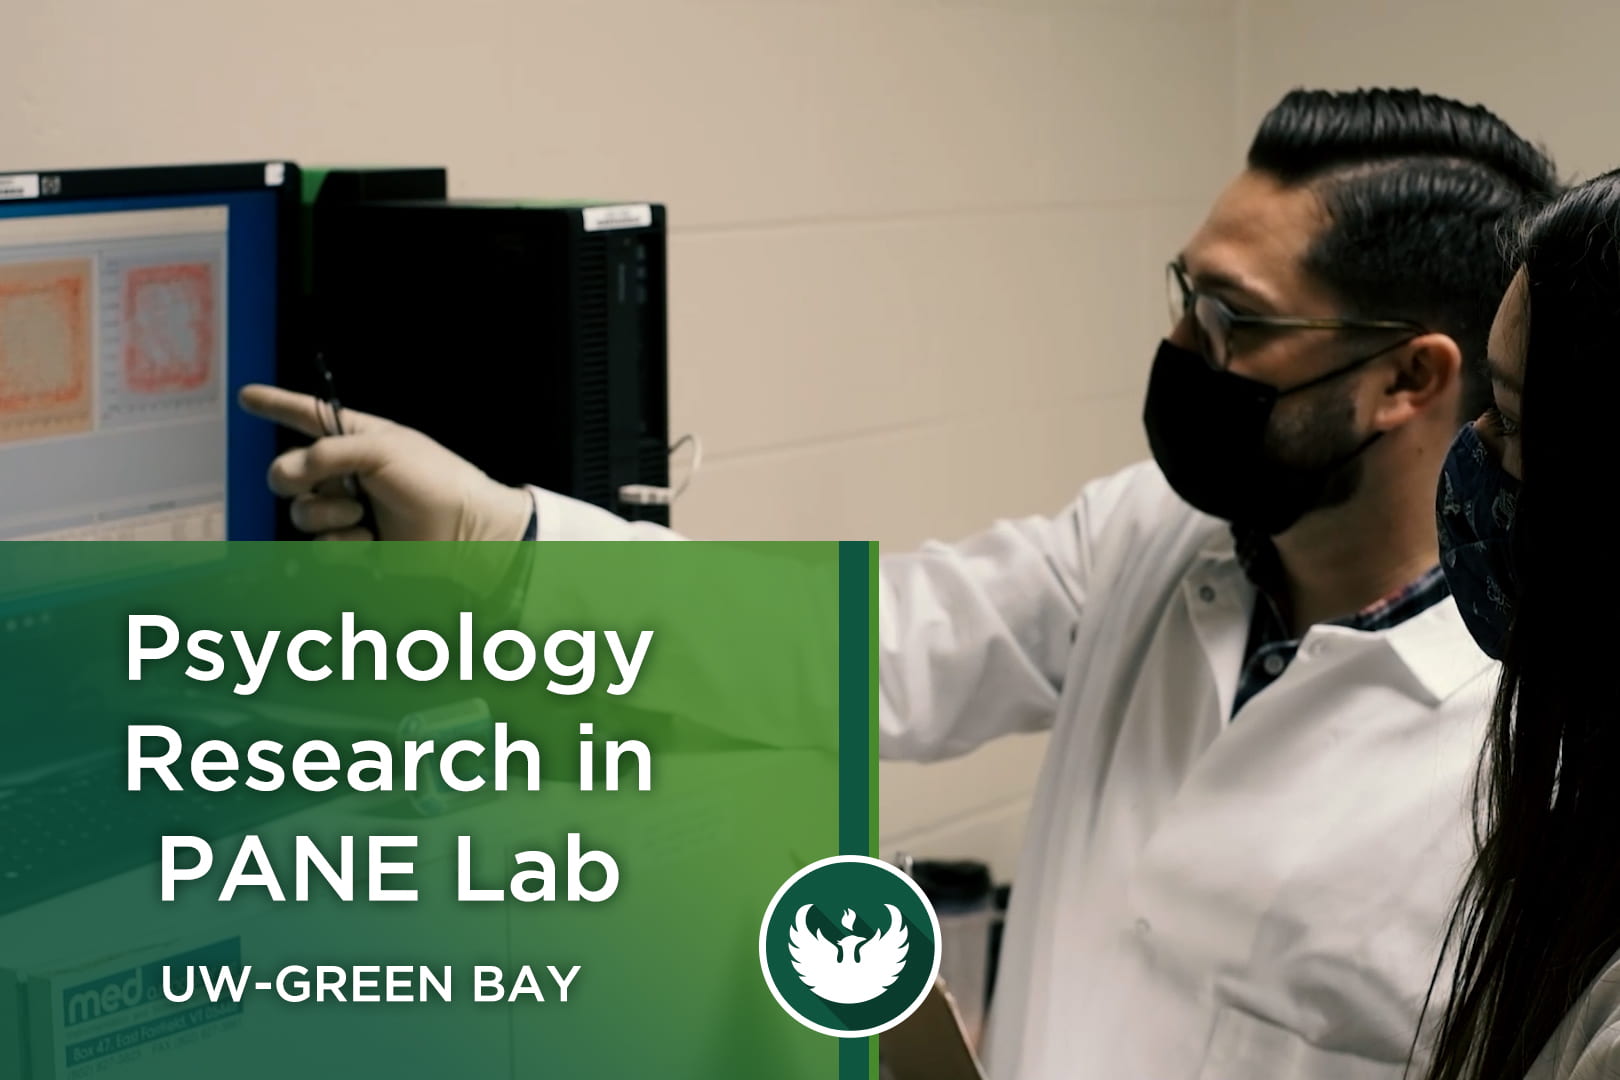 Assistant Professor Todd Hillhouse works with research student Peyton Koppenhaver on how to run a conditioned place preference test as they research a new psychopharmacological approach for pain relief inside the PANE Lab in the Lab Sciences building at UW-Green Bay.